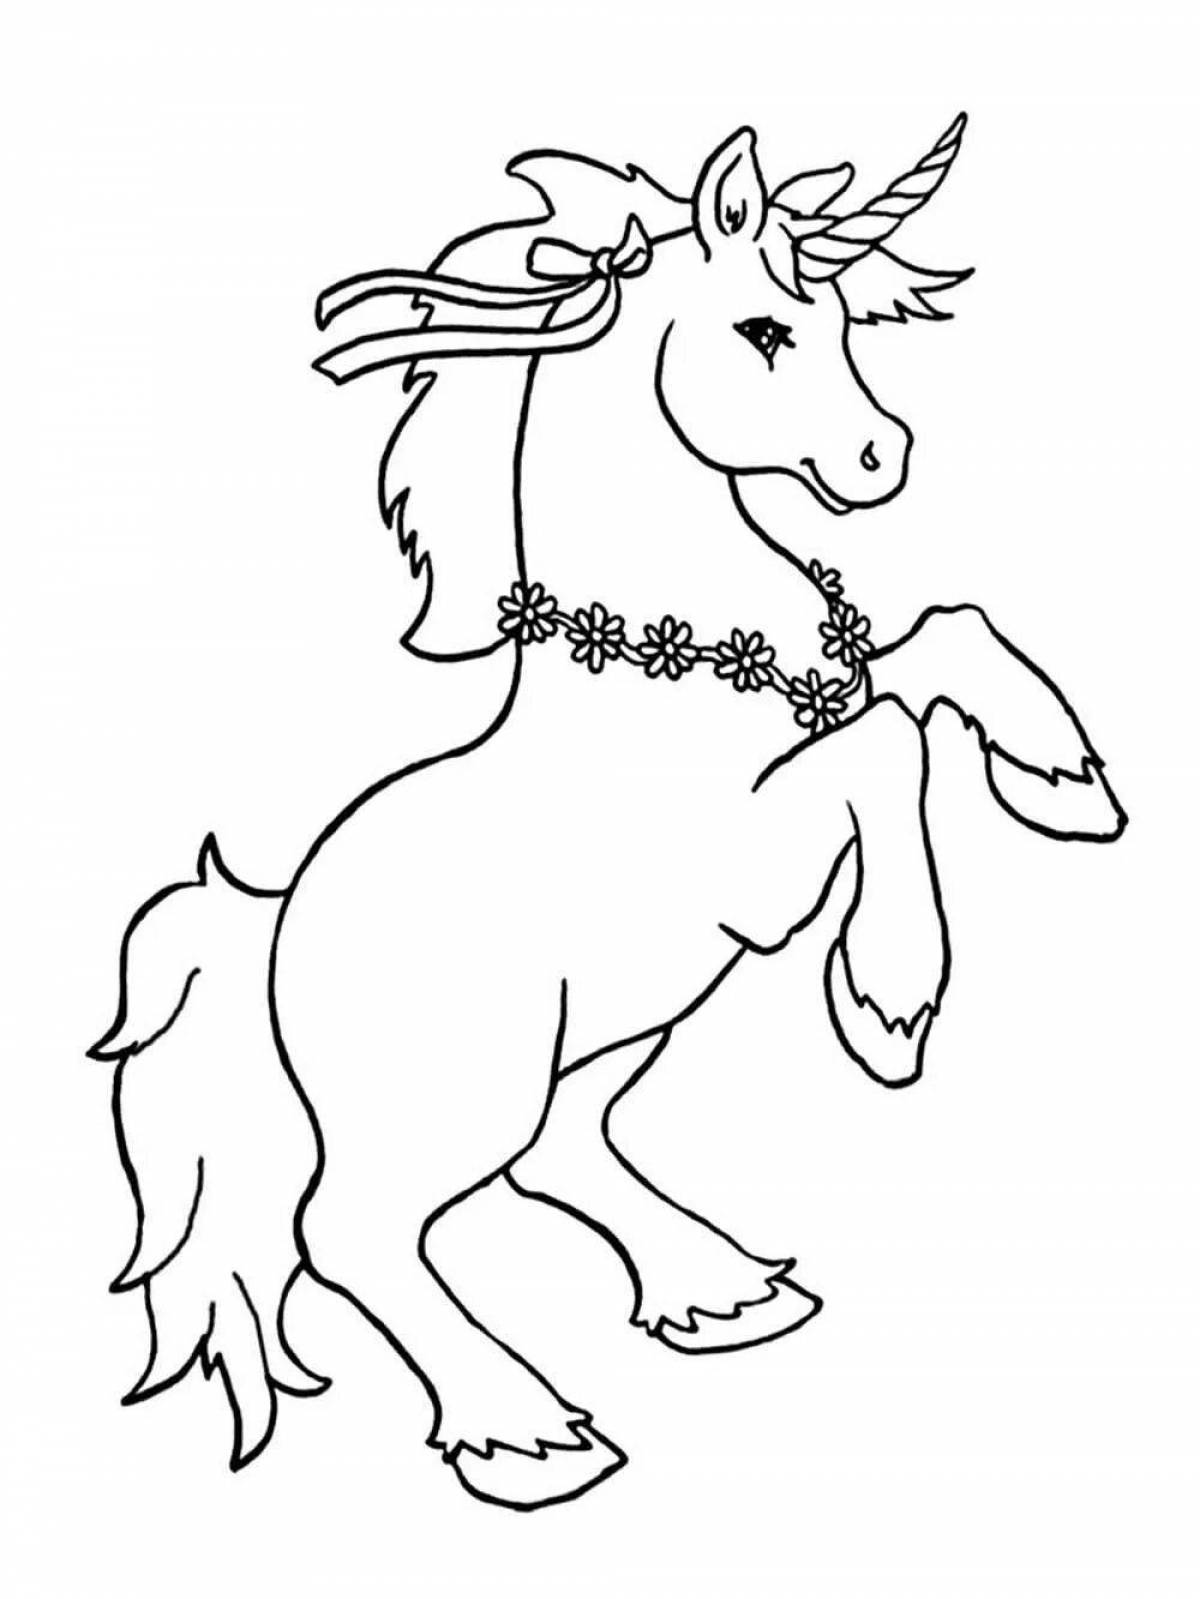 Magic coloring unicorn drawing for kids